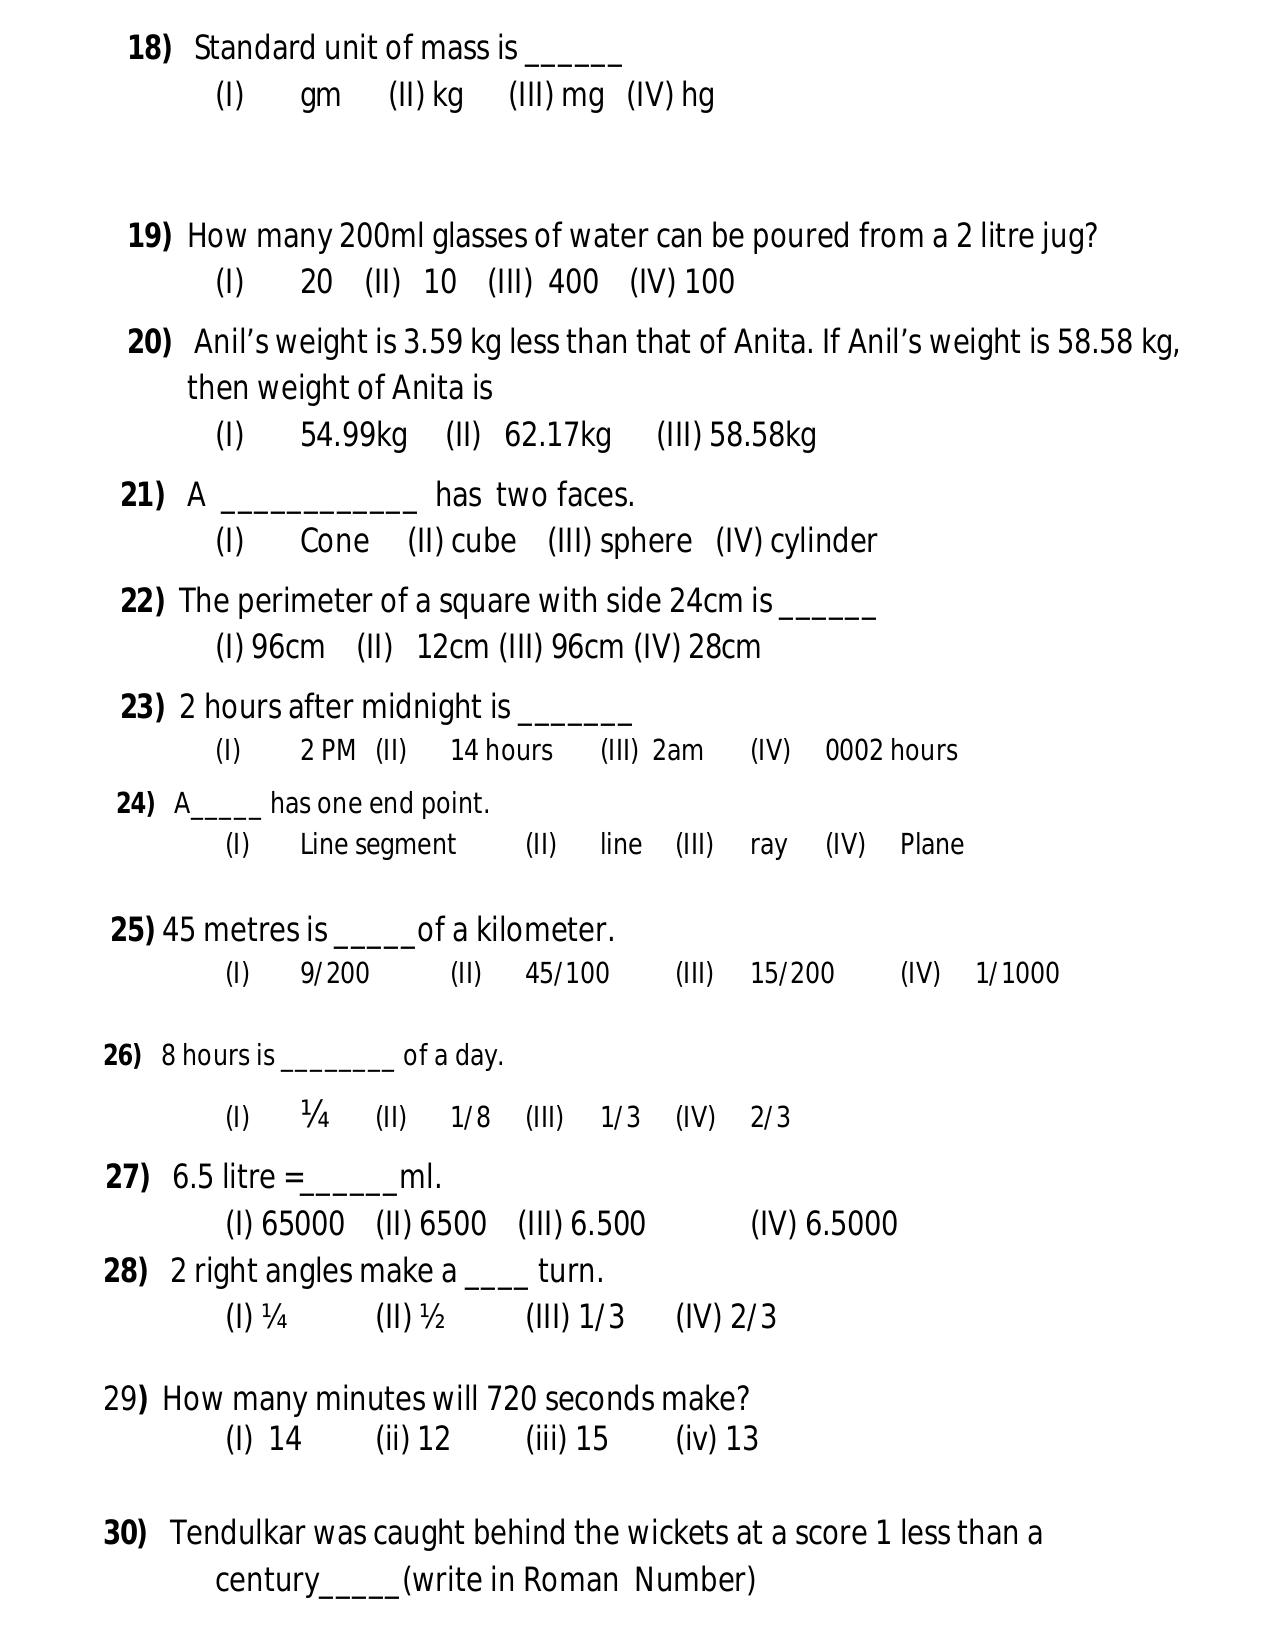 Worksheet for Class 5 Maths Assignment 16 - Page 4